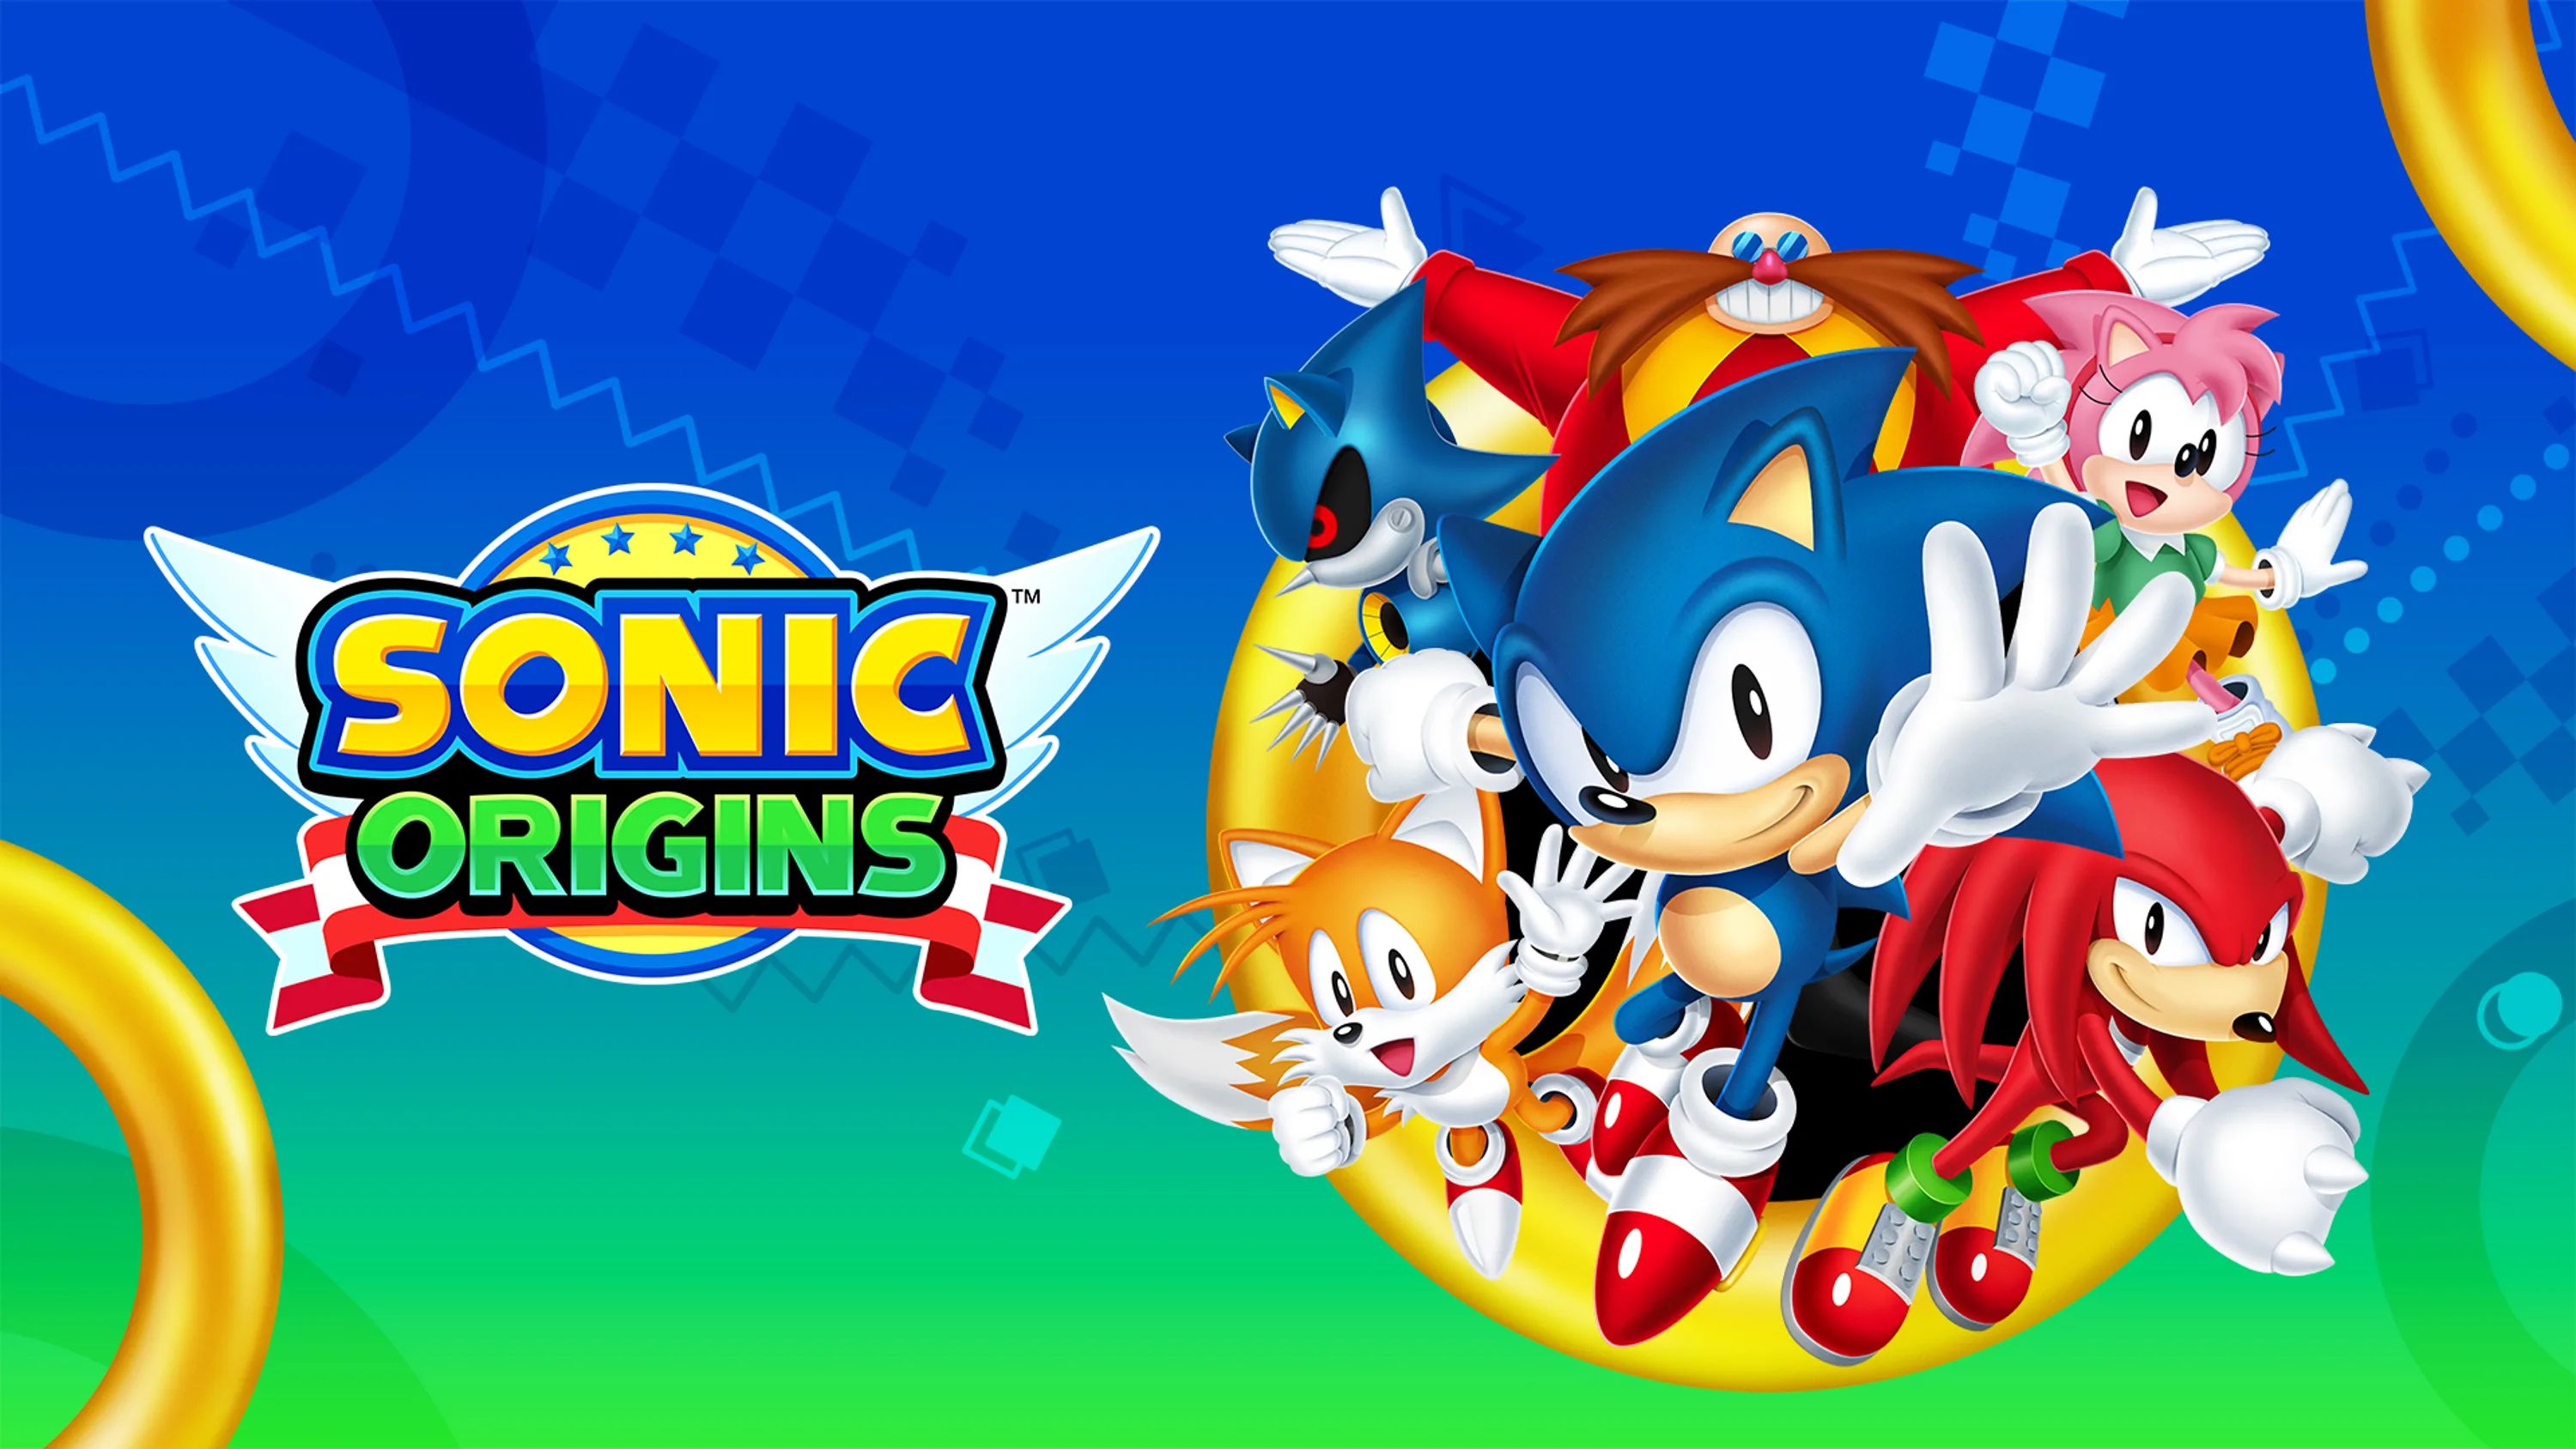 Image for Sonic Origins dashes onto consoles and PC in June